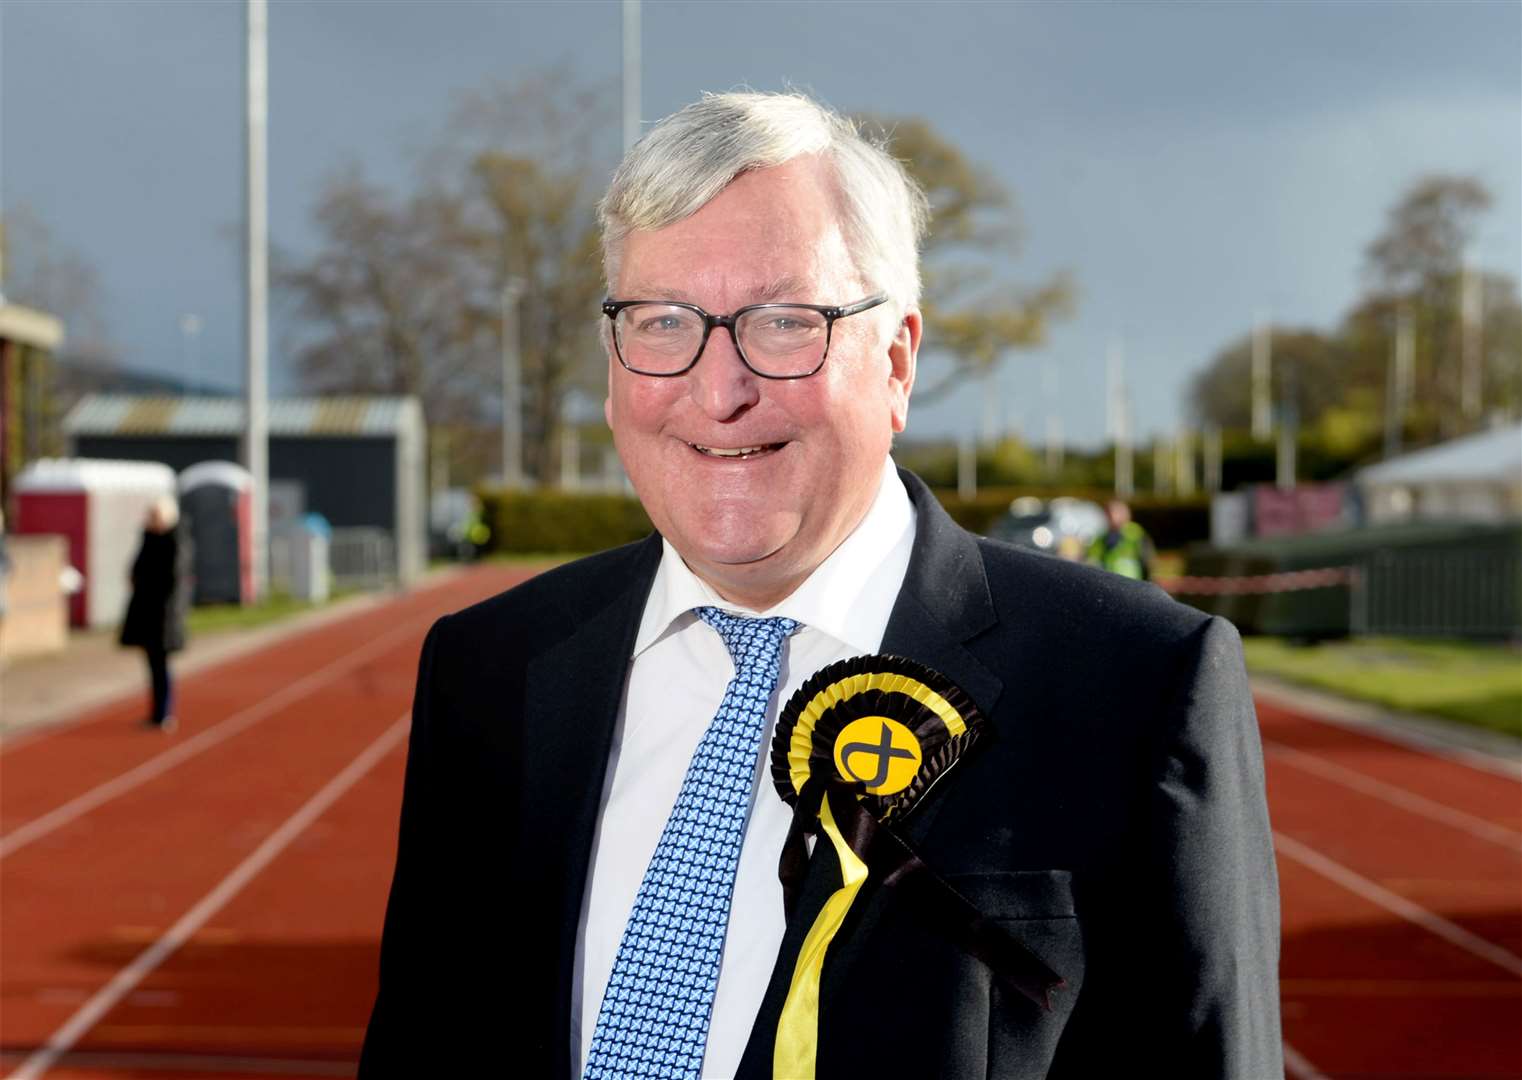 MSP Fergus Ewing shortly after being returned with a large majority in the Scottish Parliament elections.